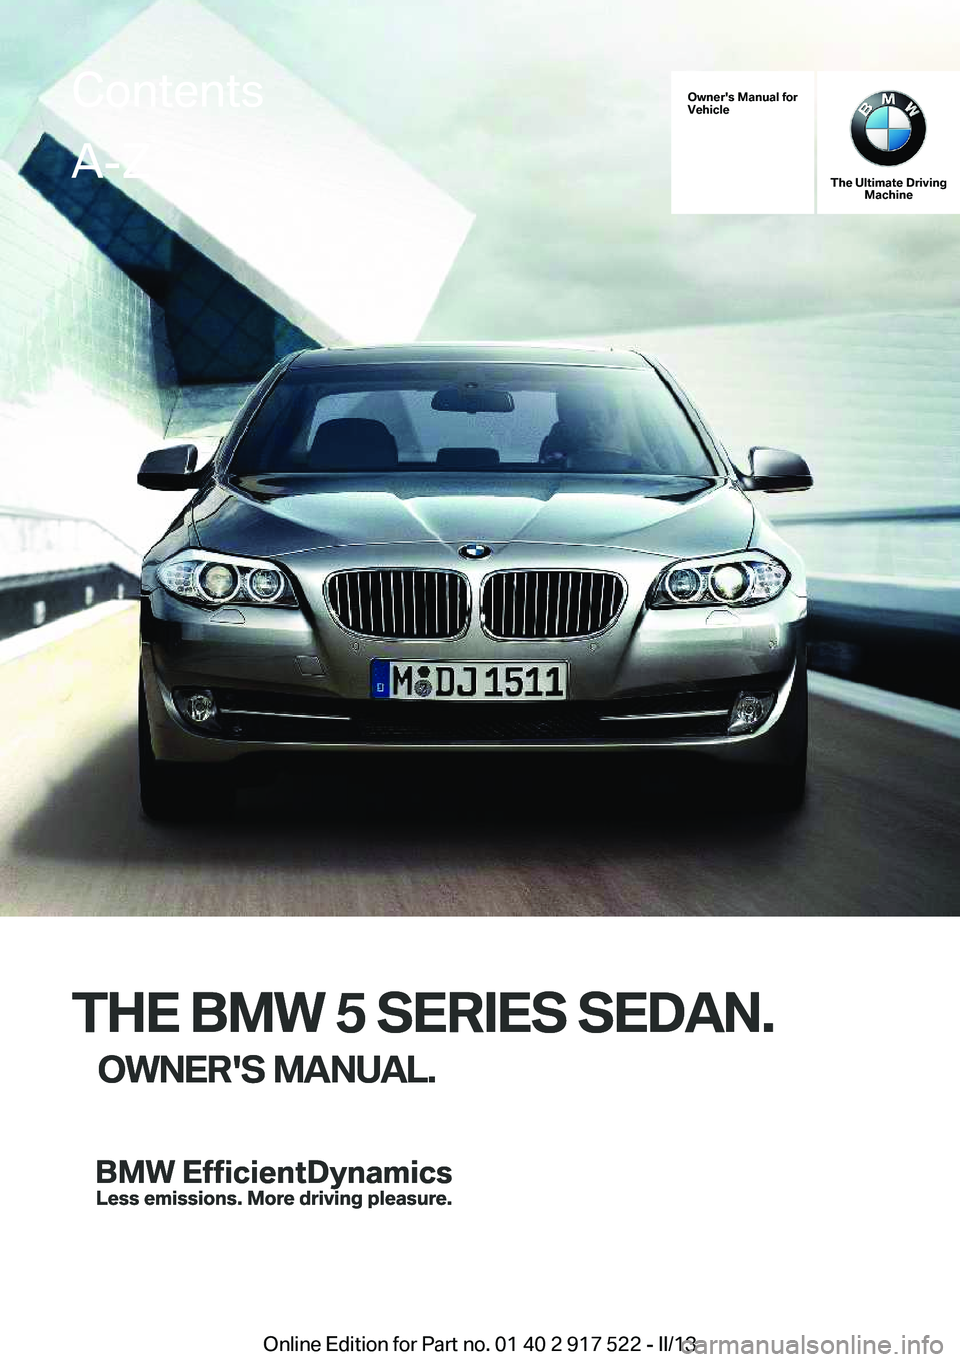 BMW 528I XDRIVE 2013  Owners Manual Owner's Manual for
Vehicle
THE BMW 5 SERIES SEDAN.
OWNER'S MANUAL.
The Ultimate Driving Machine
THE BMW 5 SERIES SEDAN.
OWNER'S MANUAL.
ContentsA-Z
Online Edition for Part no. 01 40 2 917 